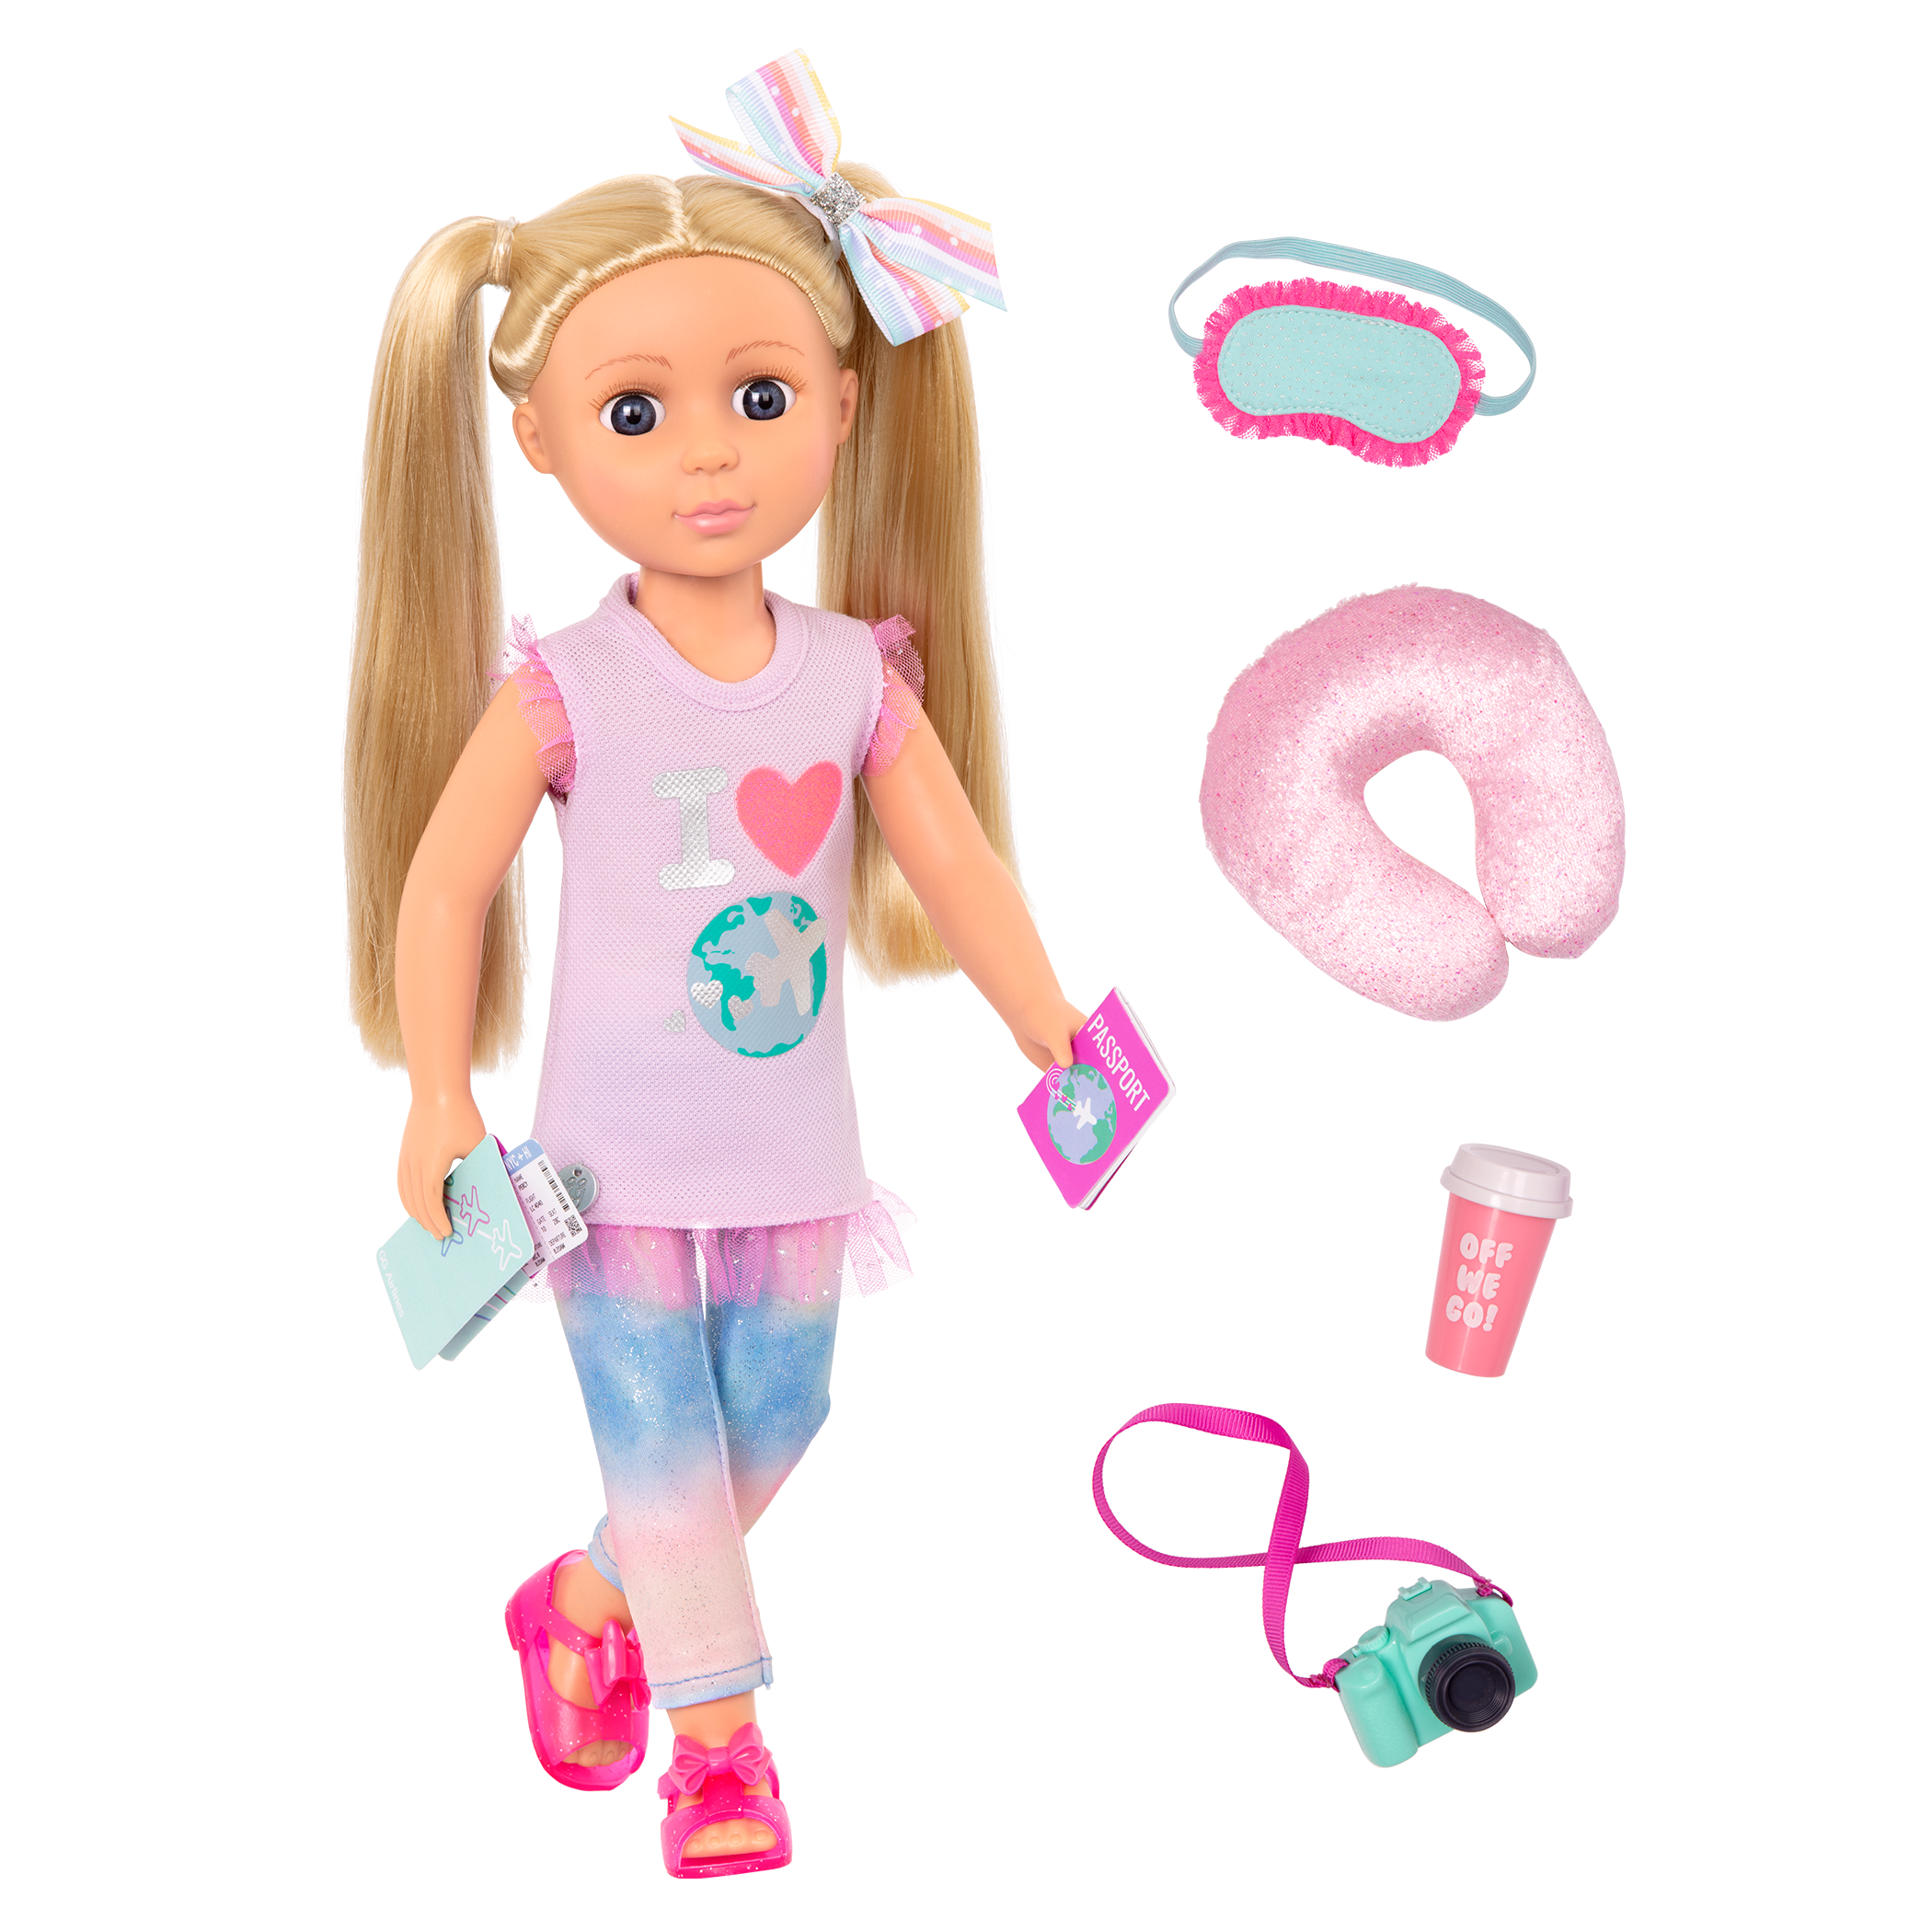  Glitter Girls - Sashka 14-inch Poseable Fashion Doll for Girls  Age 3 & Up : Toys & Games